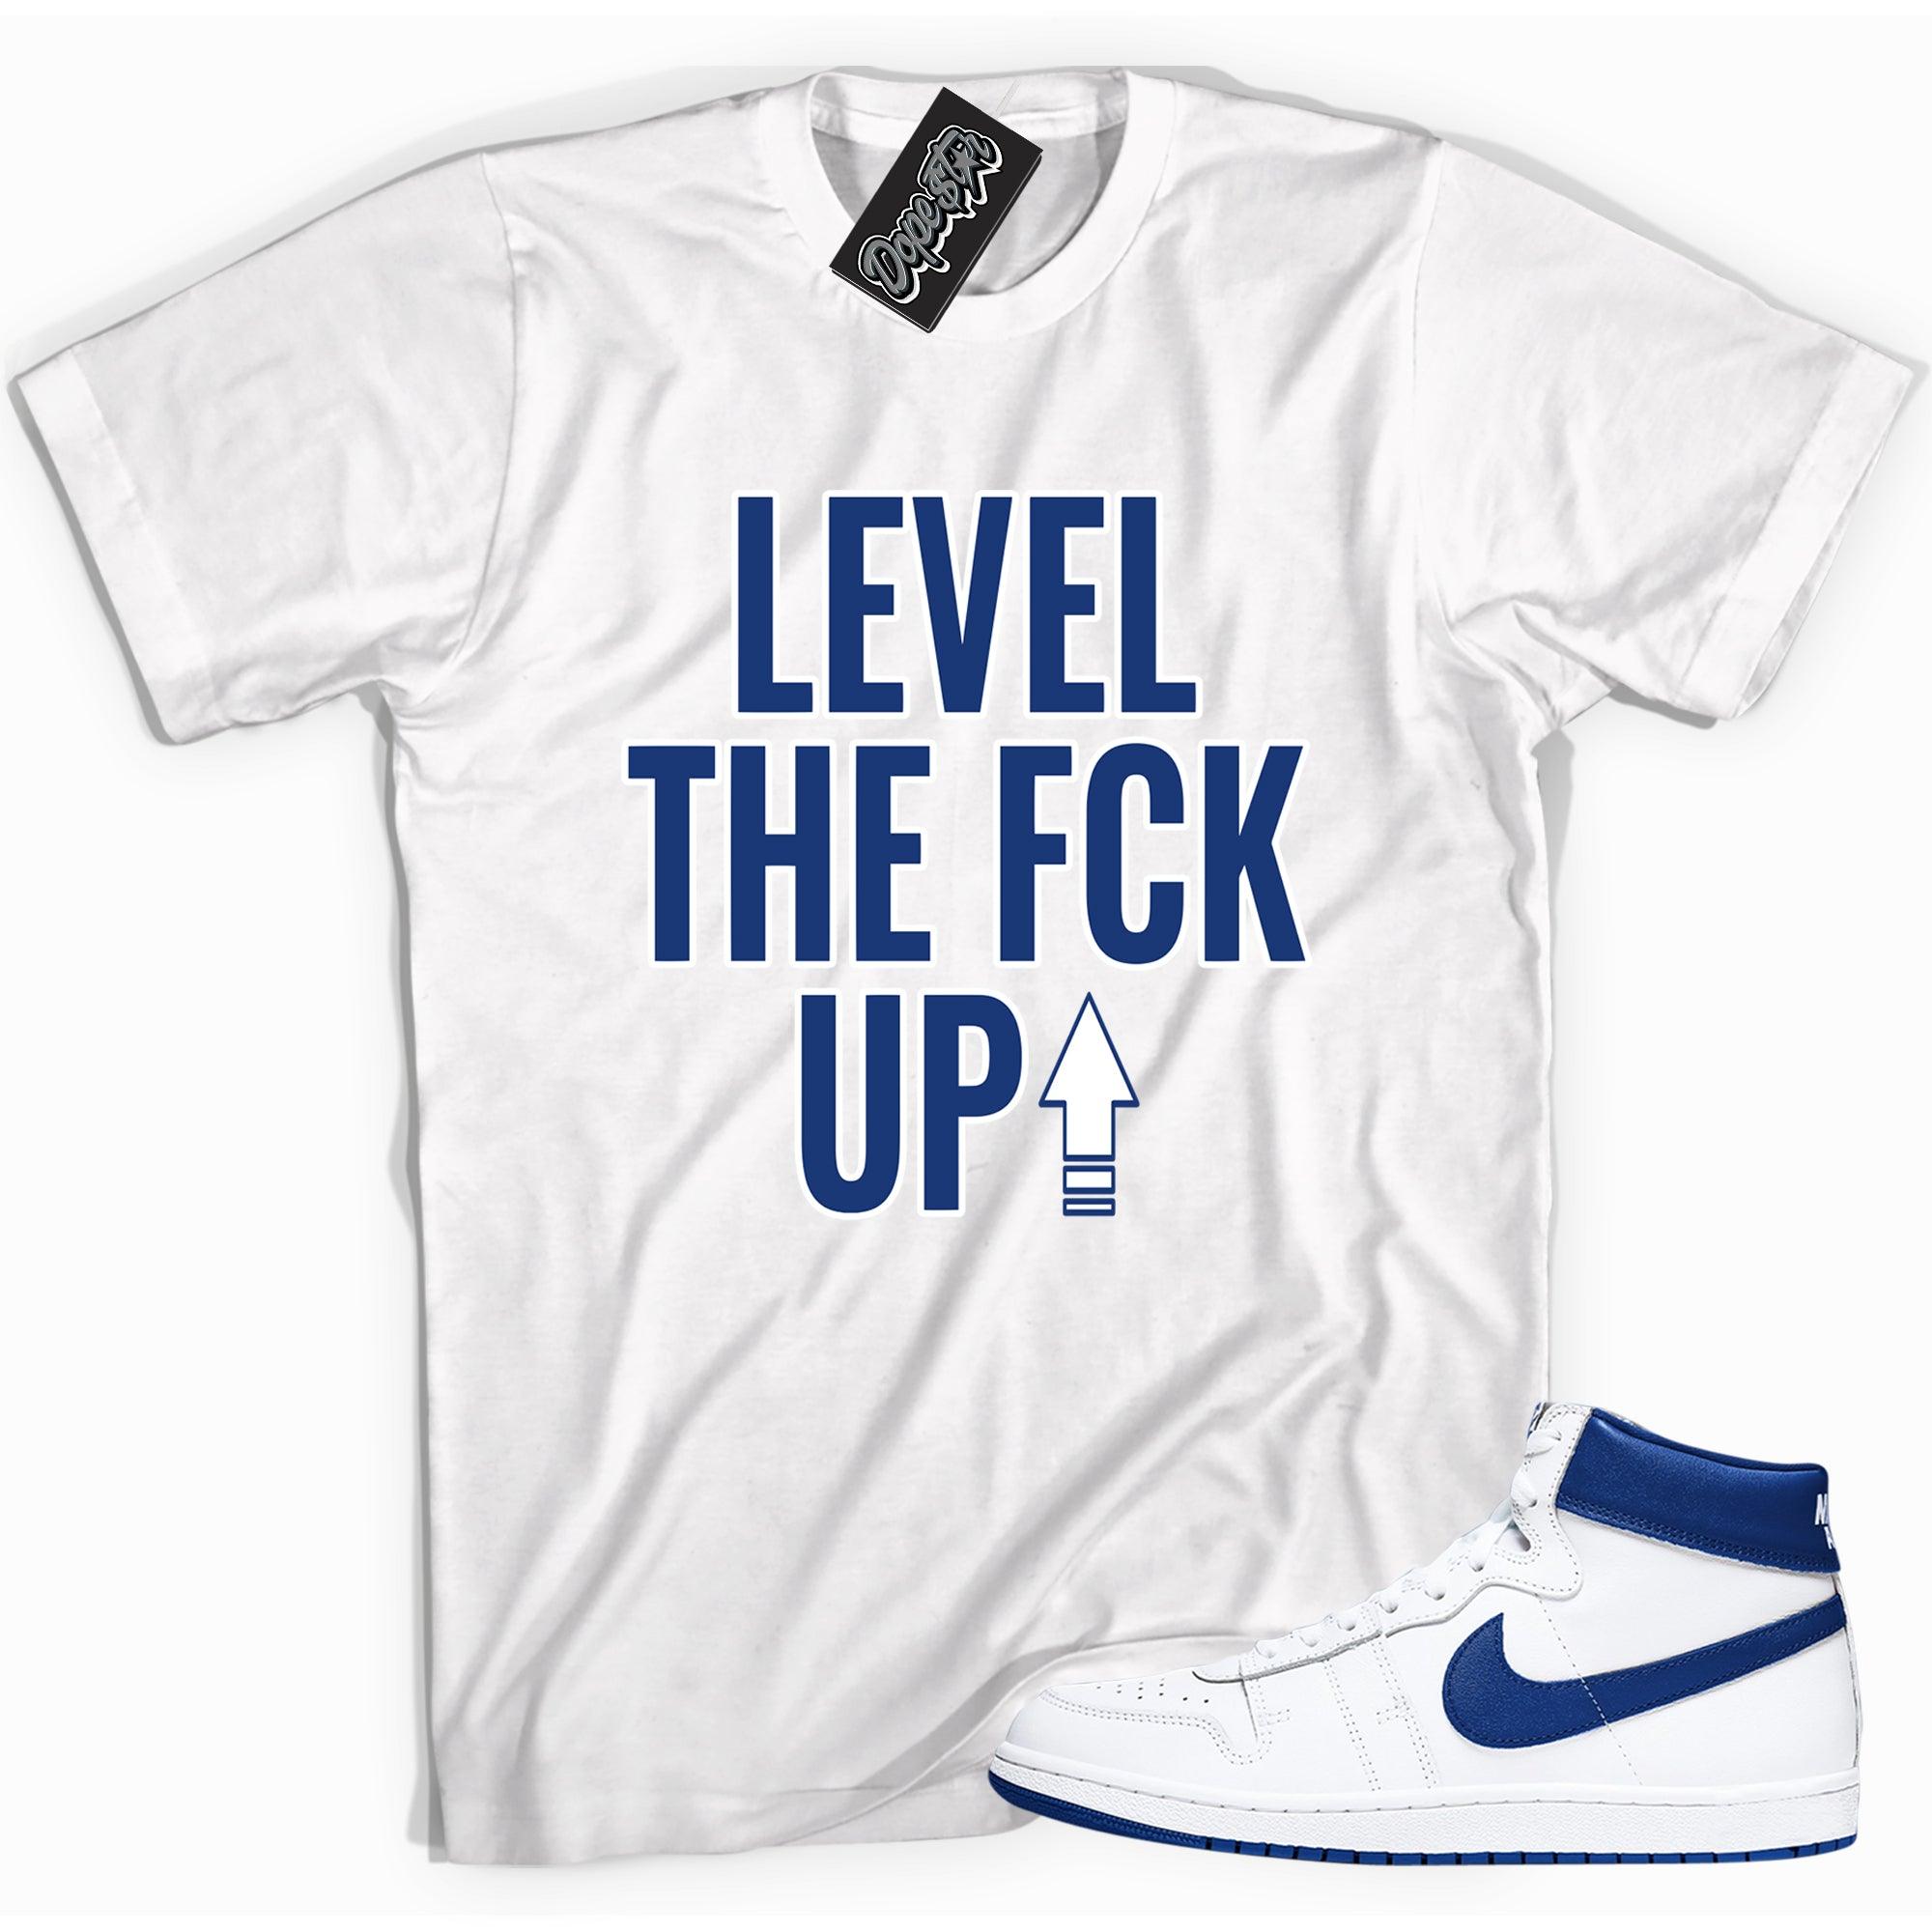 Cool white graphic tee with 'Level Up' print, that perfectly matches Nike Air Ship A Ma Maniére Game Royal sneakers.